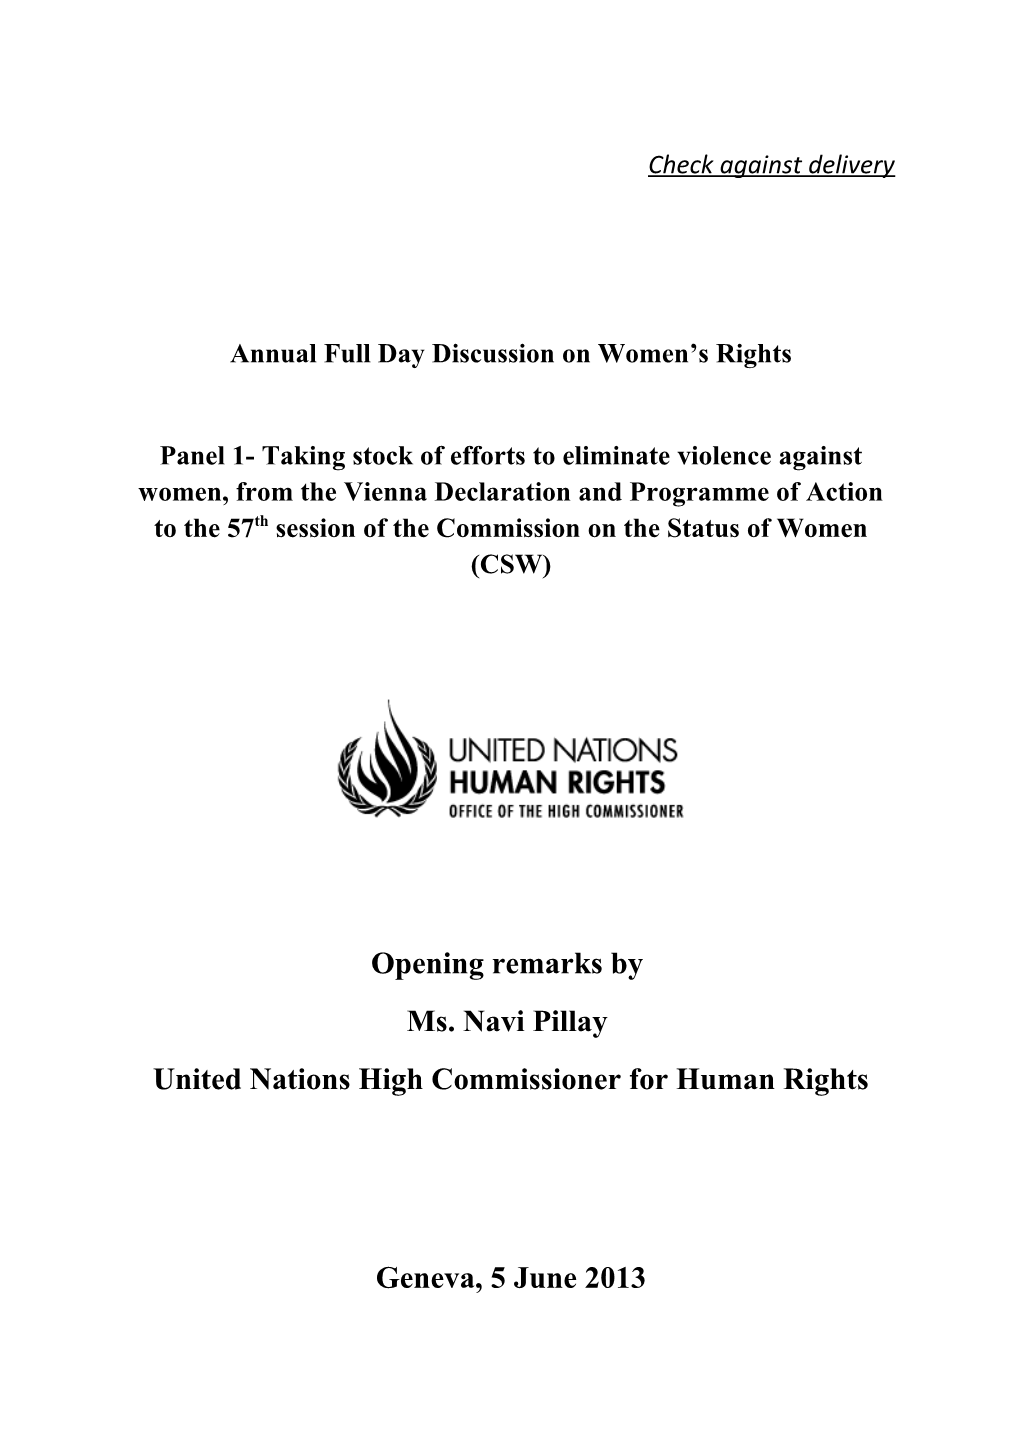 Statement by the UN High Commissioner for Human Rights